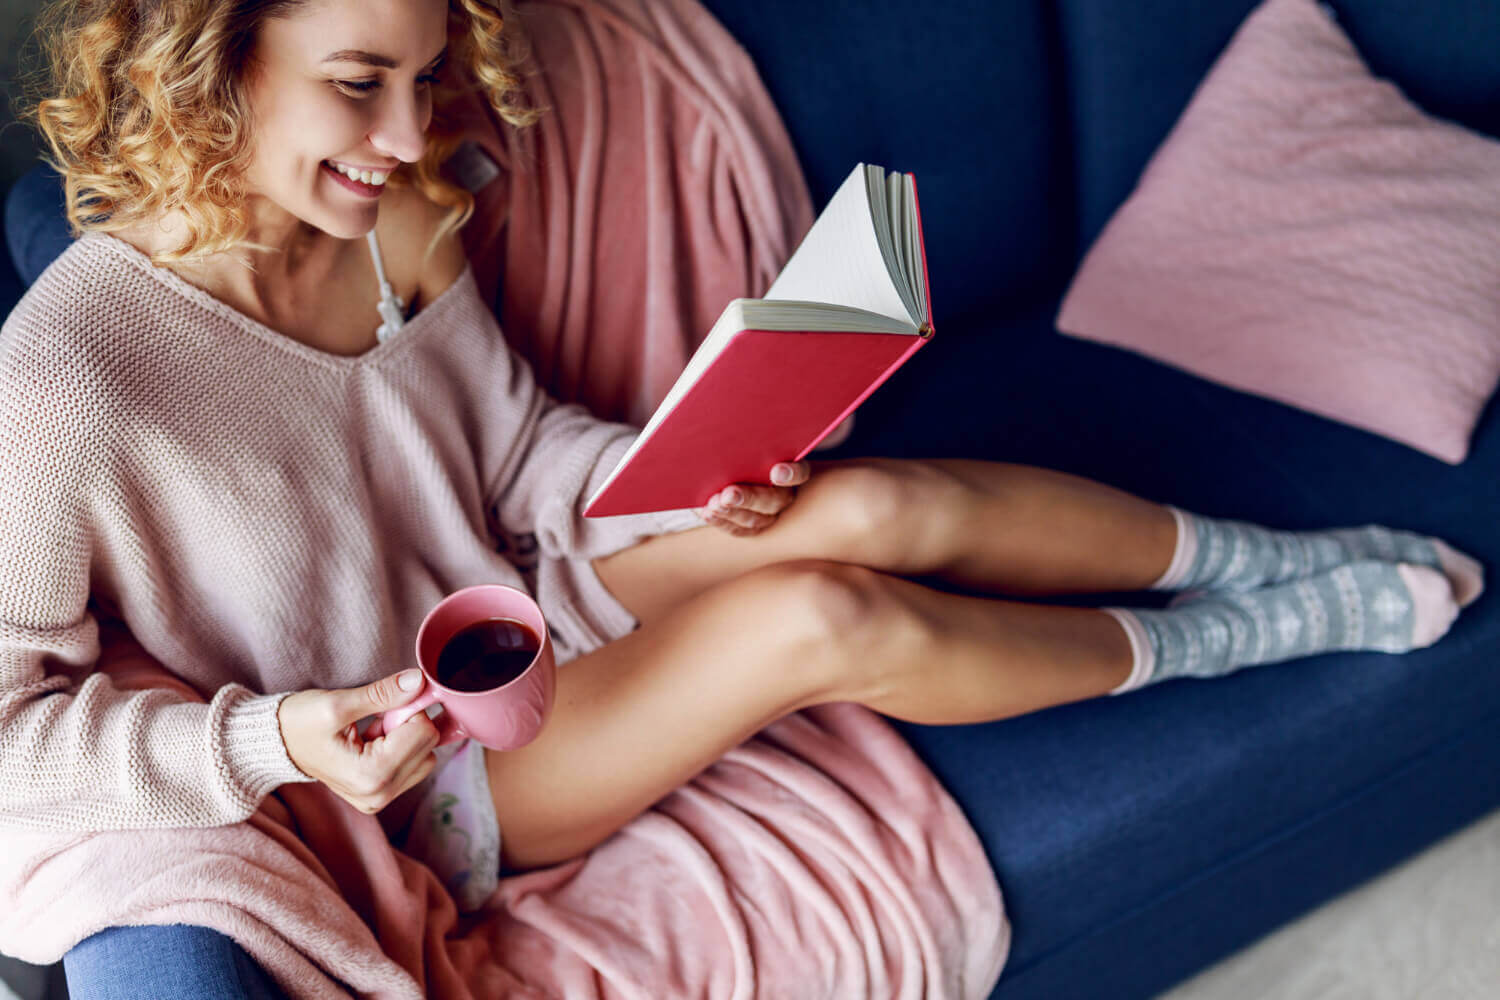 Reading a book is 1 of our 10 Rainy Day Date Ideas